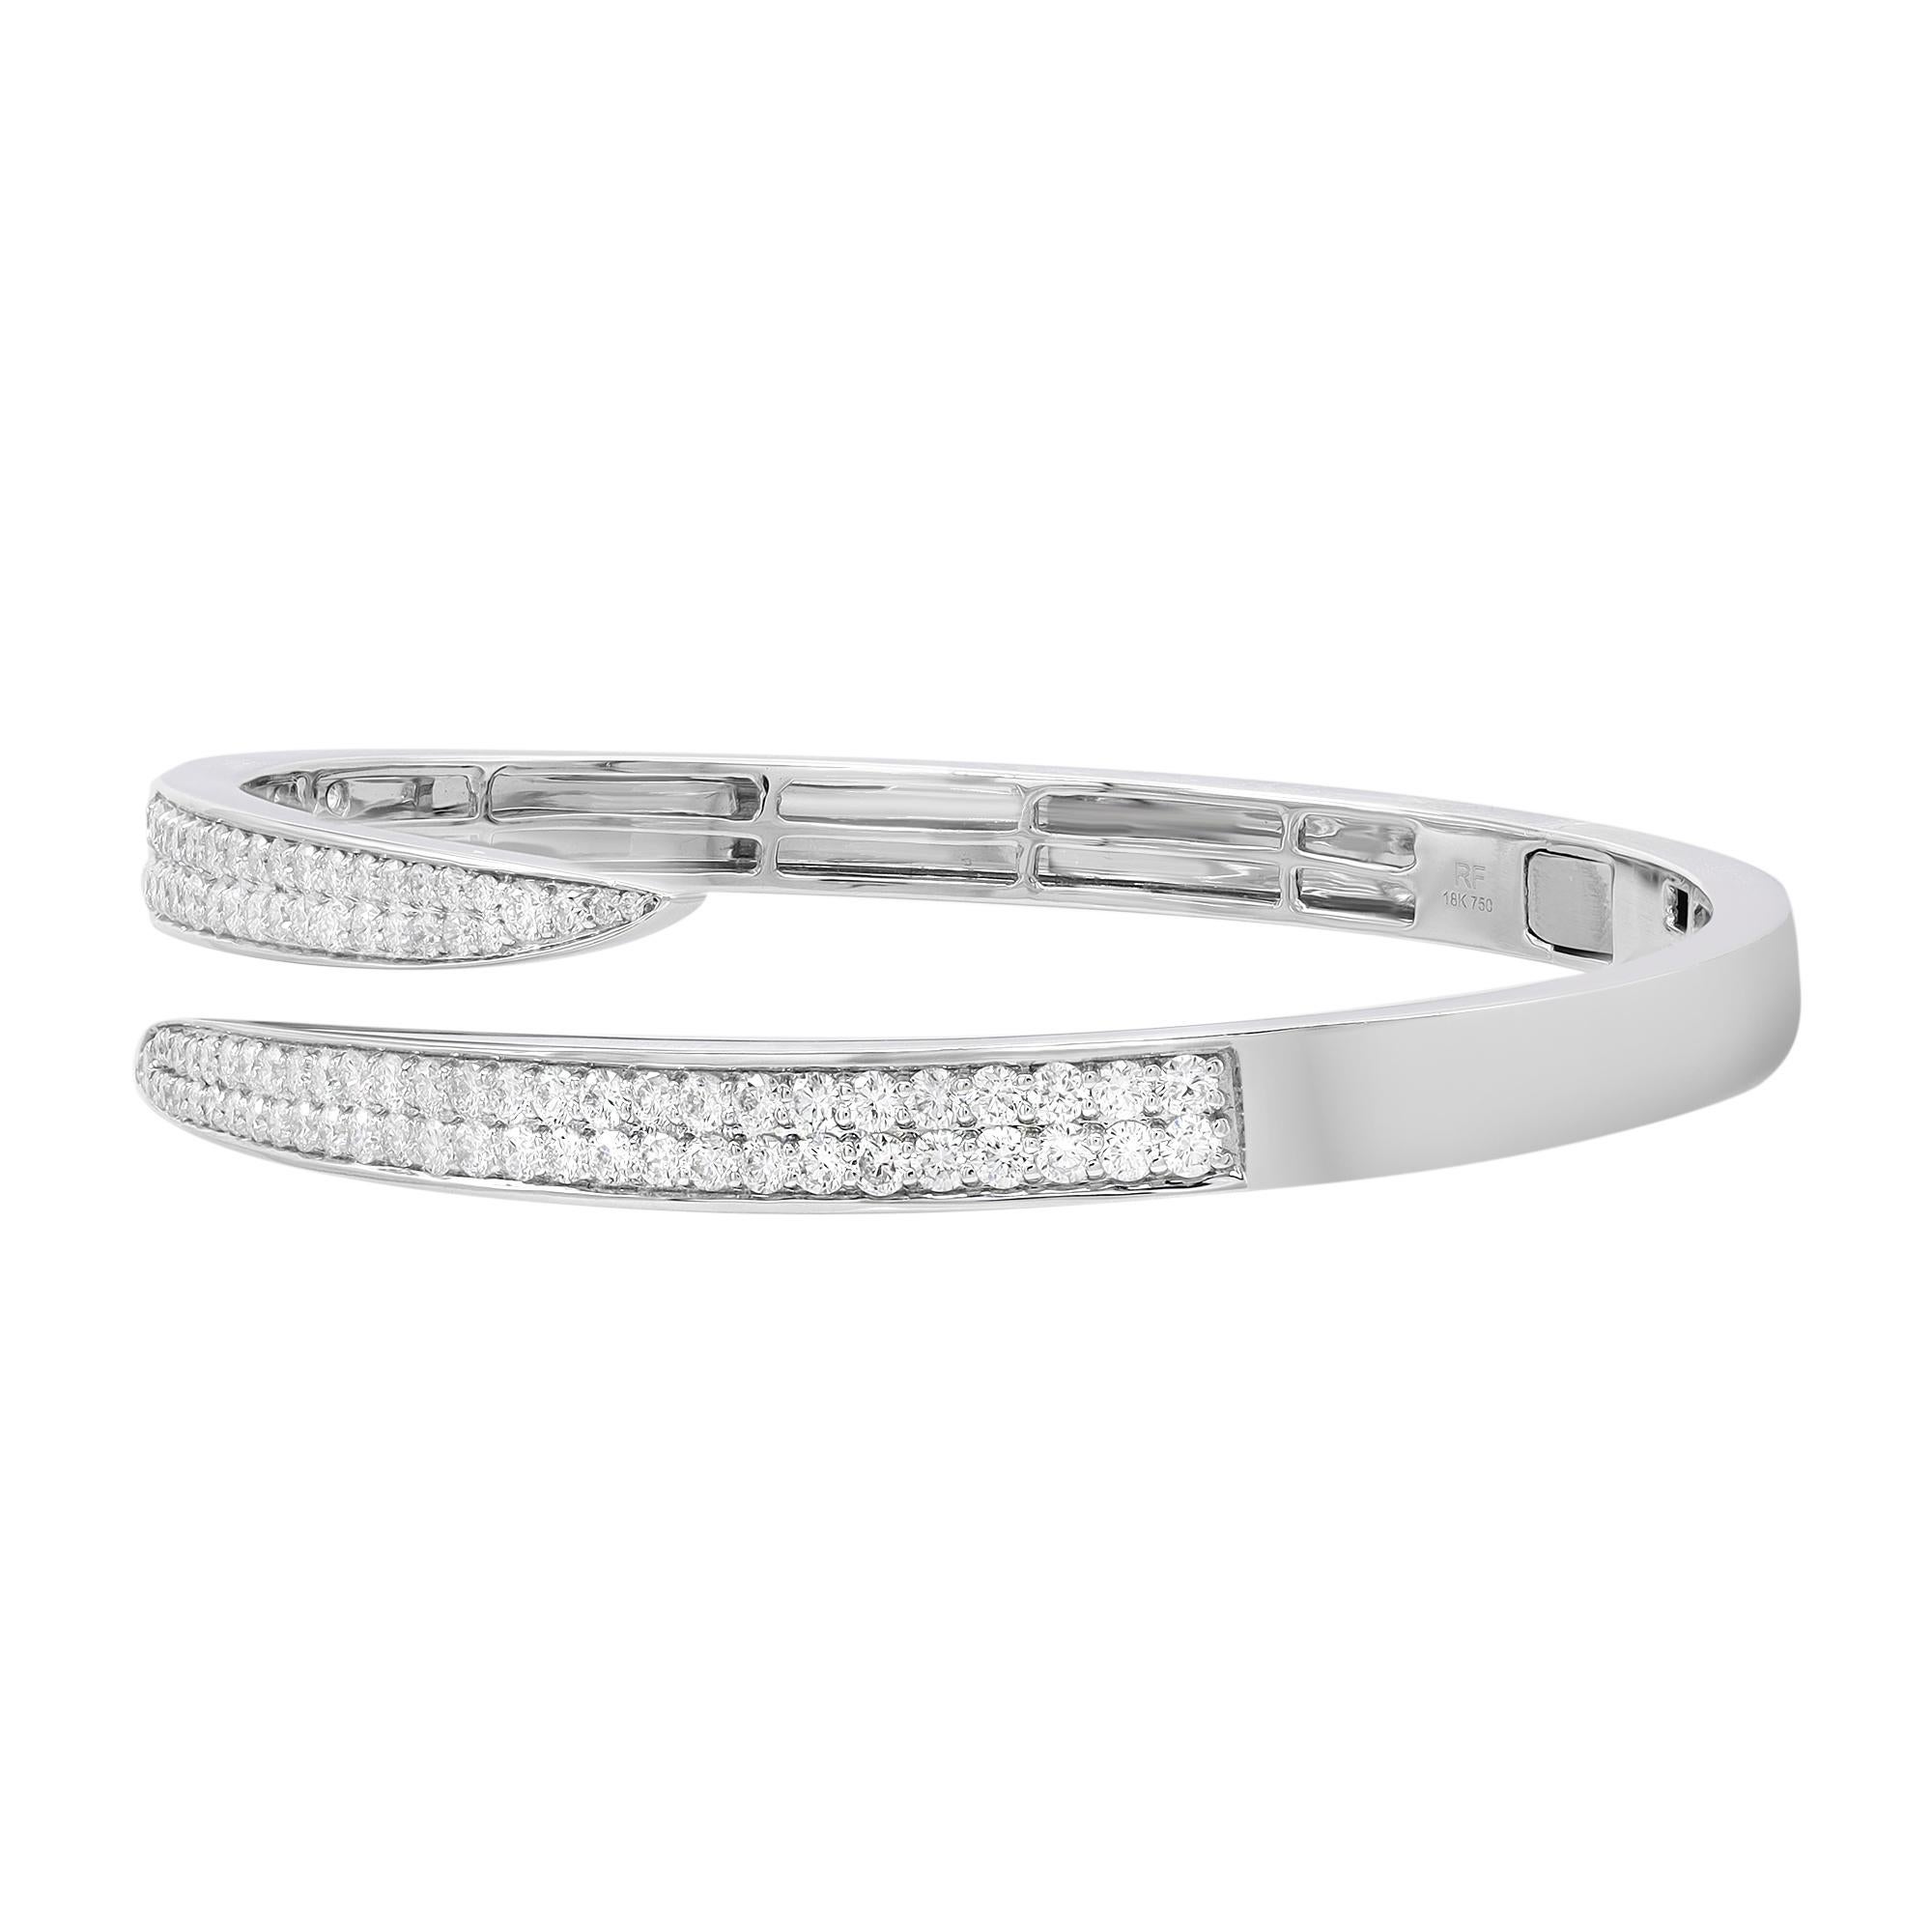 Let your style shine with this fancy and elegant diamond bangle bracelet. Encrusted with pave set bright white natural round cut diamonds set halfway through the bangle. Crafted in fine high polished 18k white gold. The total diamond weight is 2.99